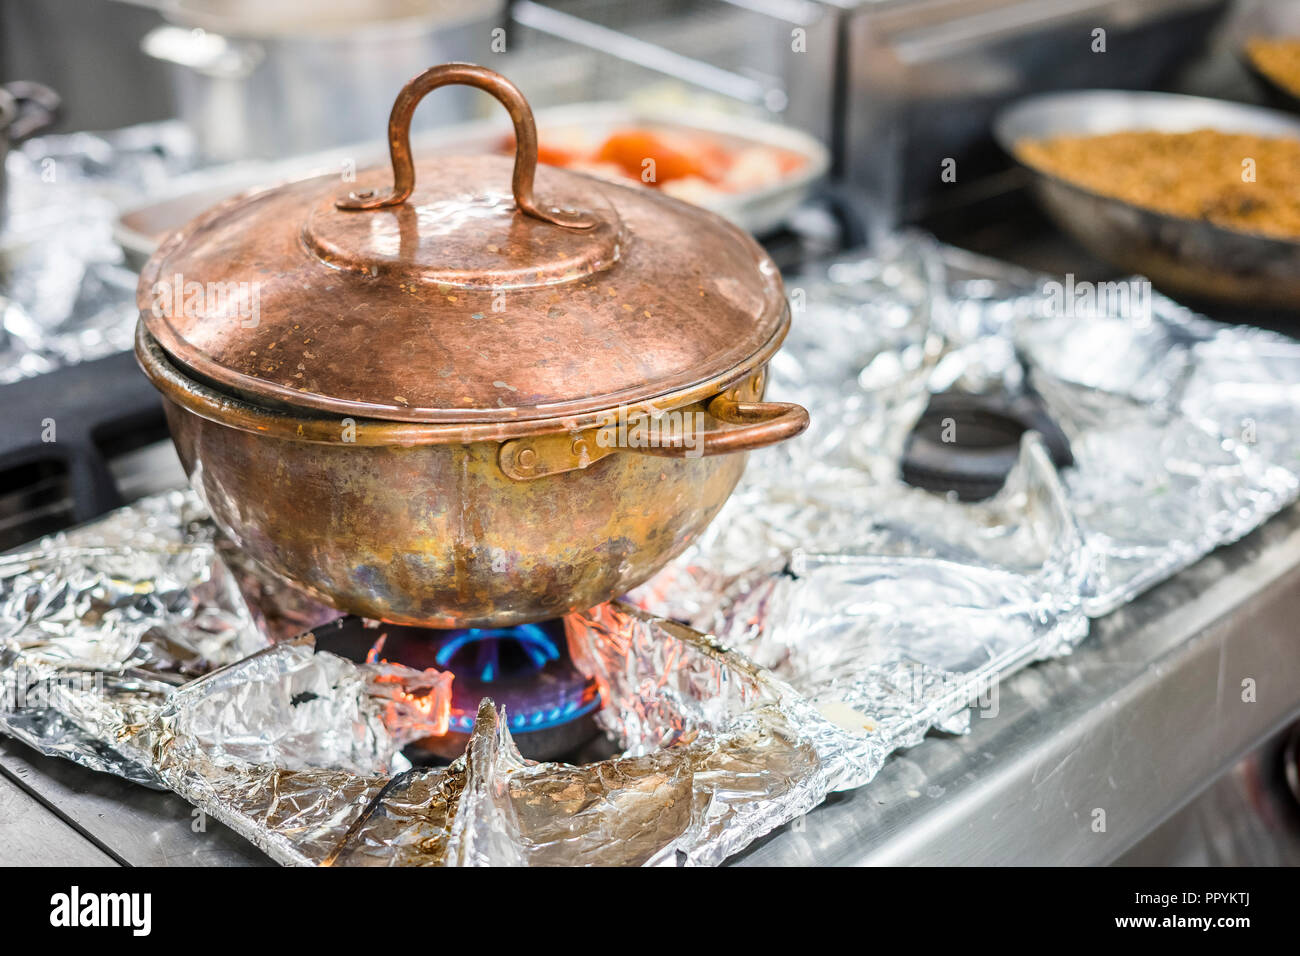 https://c8.alamy.com/comp/PPYKTJ/vintage-copper-pot-with-food-on-gas-stove-in-the-restaurant-PPYKTJ.jpg